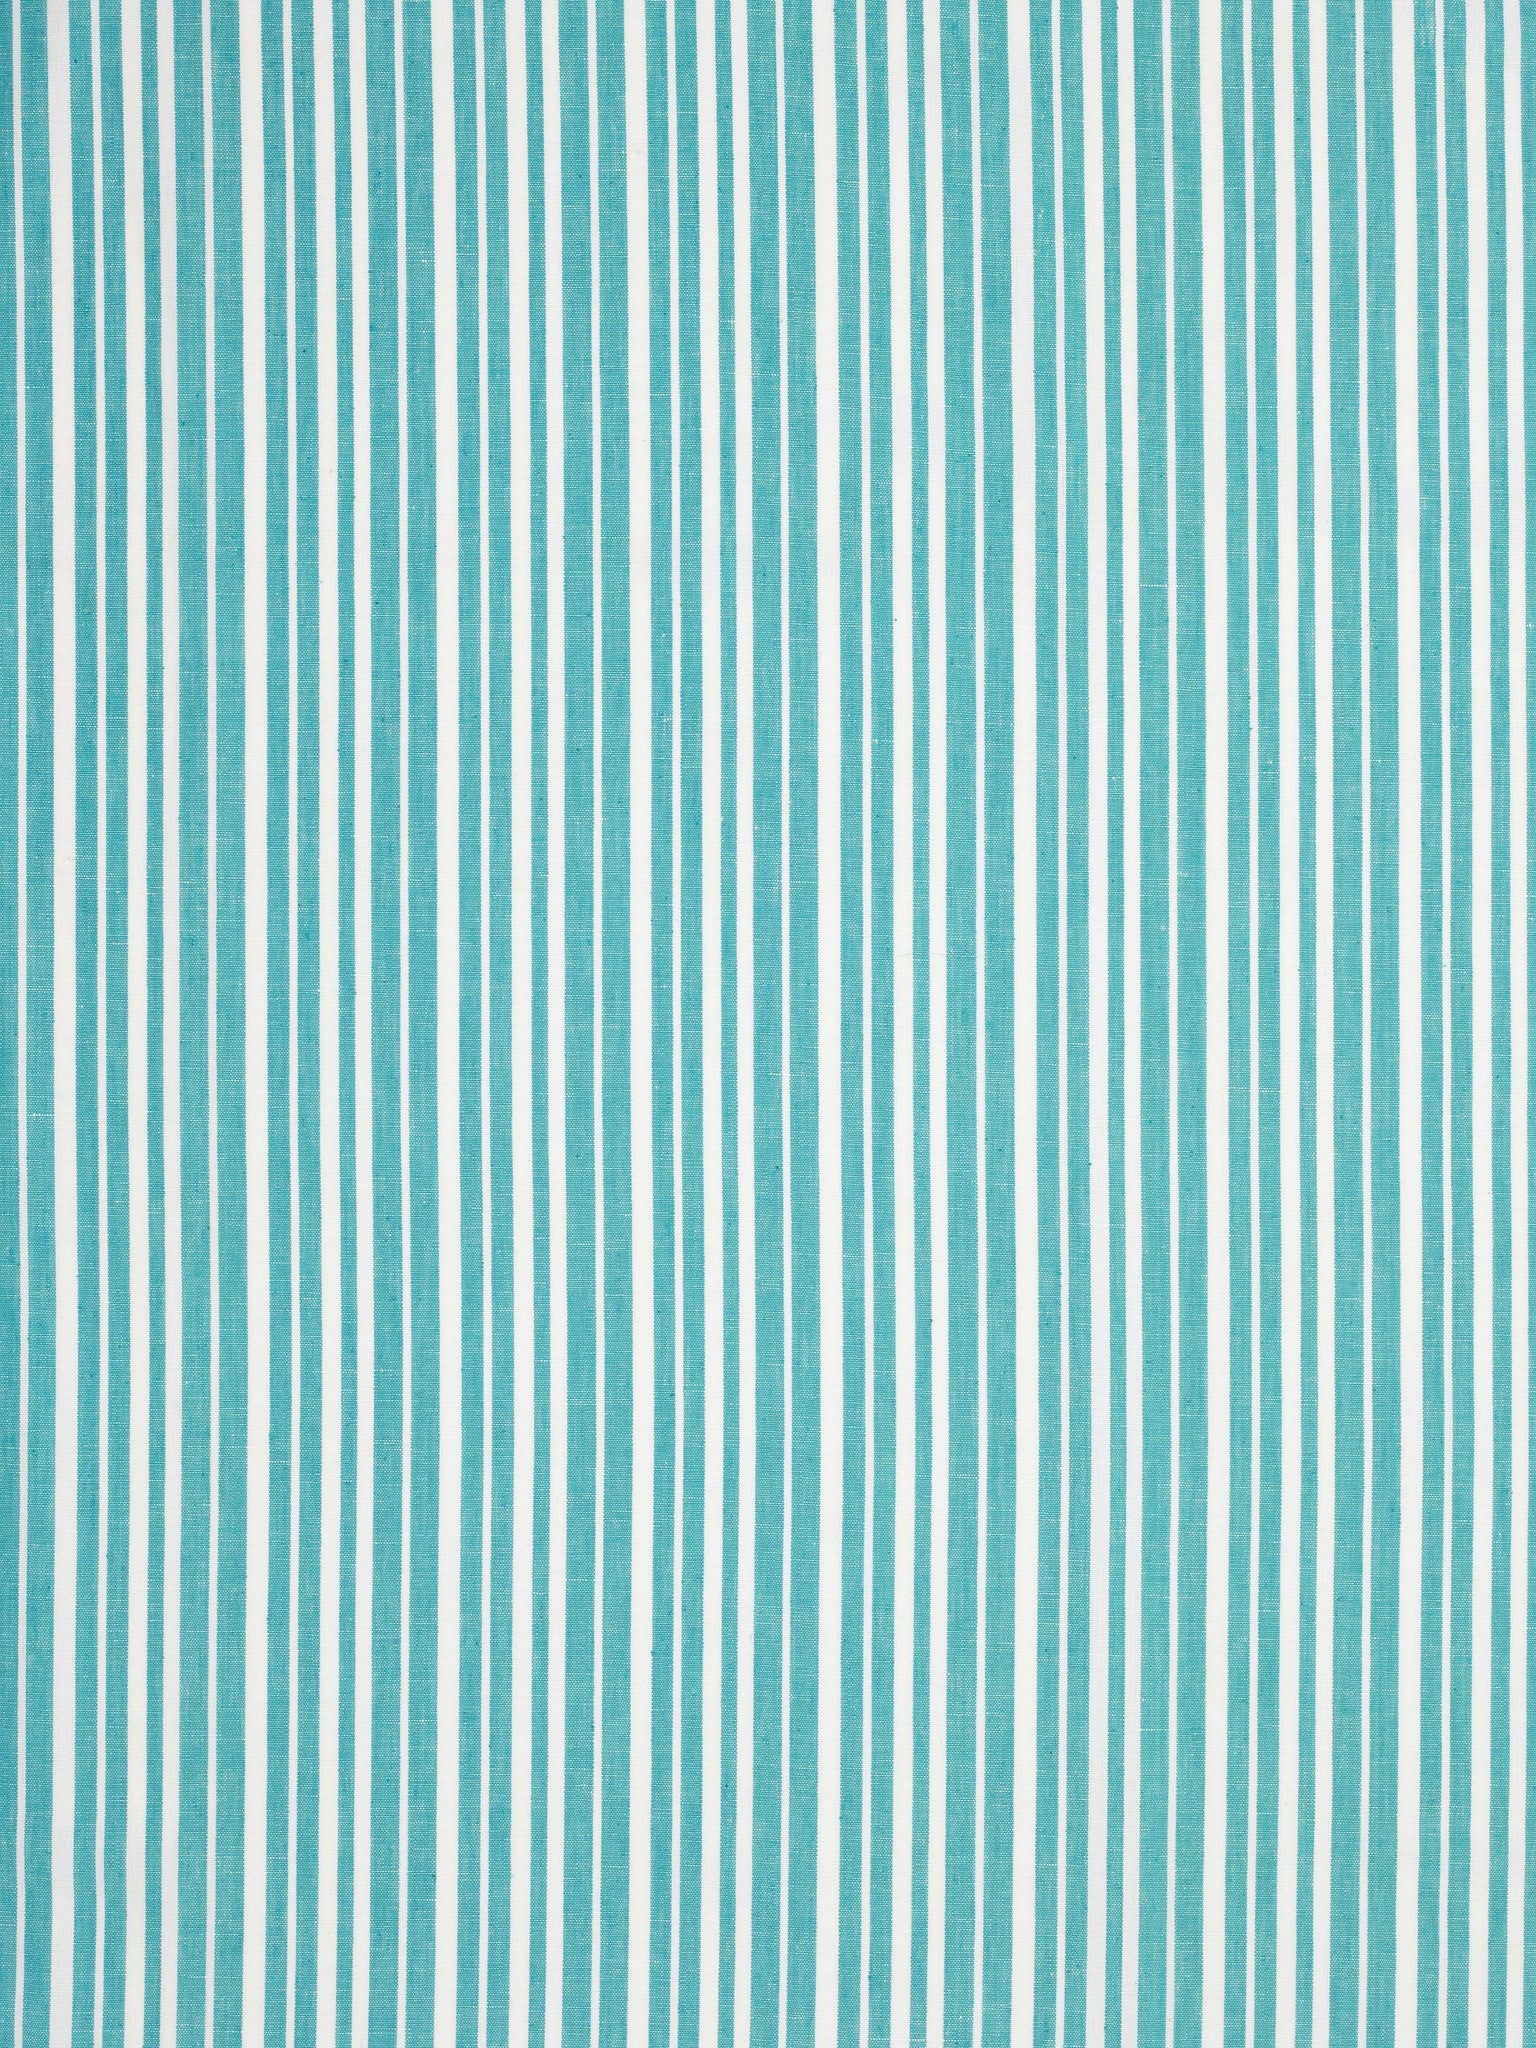 Palermo Ticking Stripe Cotton Linen Home Decor Fabric by the Meter or yard for curtains, blinds, upholstery in Pacific Turquoise Blue ships from Canada (USA)